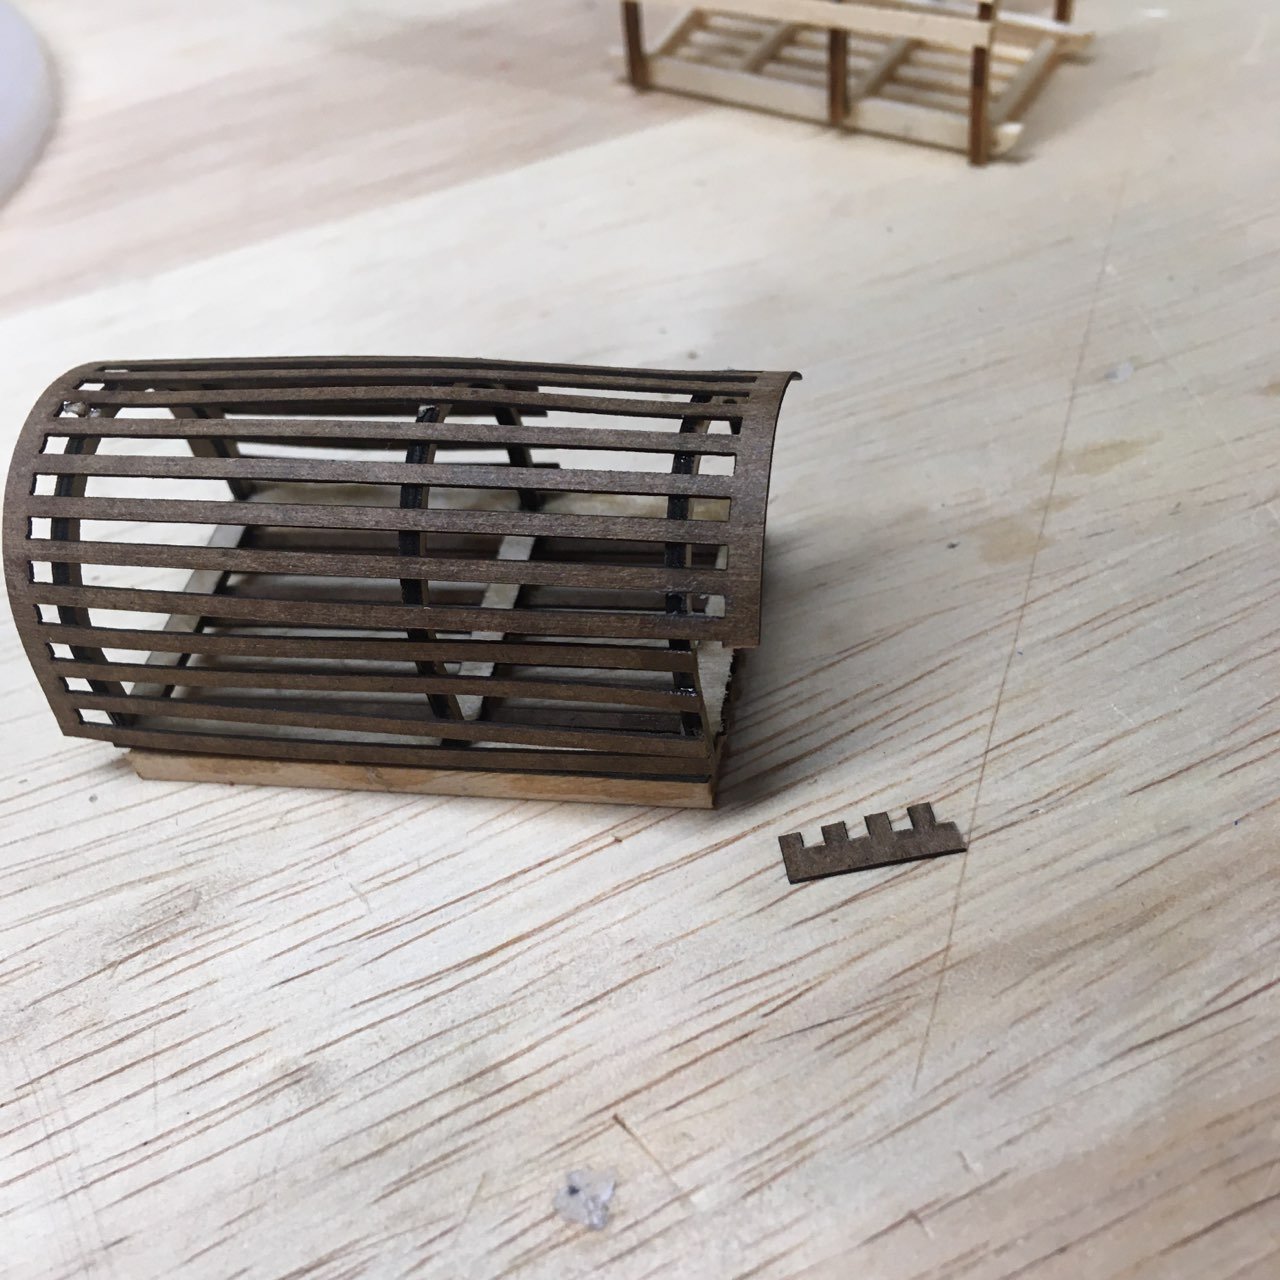 New Lobster trap kit design by BlueJacket Shipcrafters - Traders, Dealers,  Buying or Selling anything? - Discuss New Products and Ship Model Goodies  here as well!! - Model Ship World™